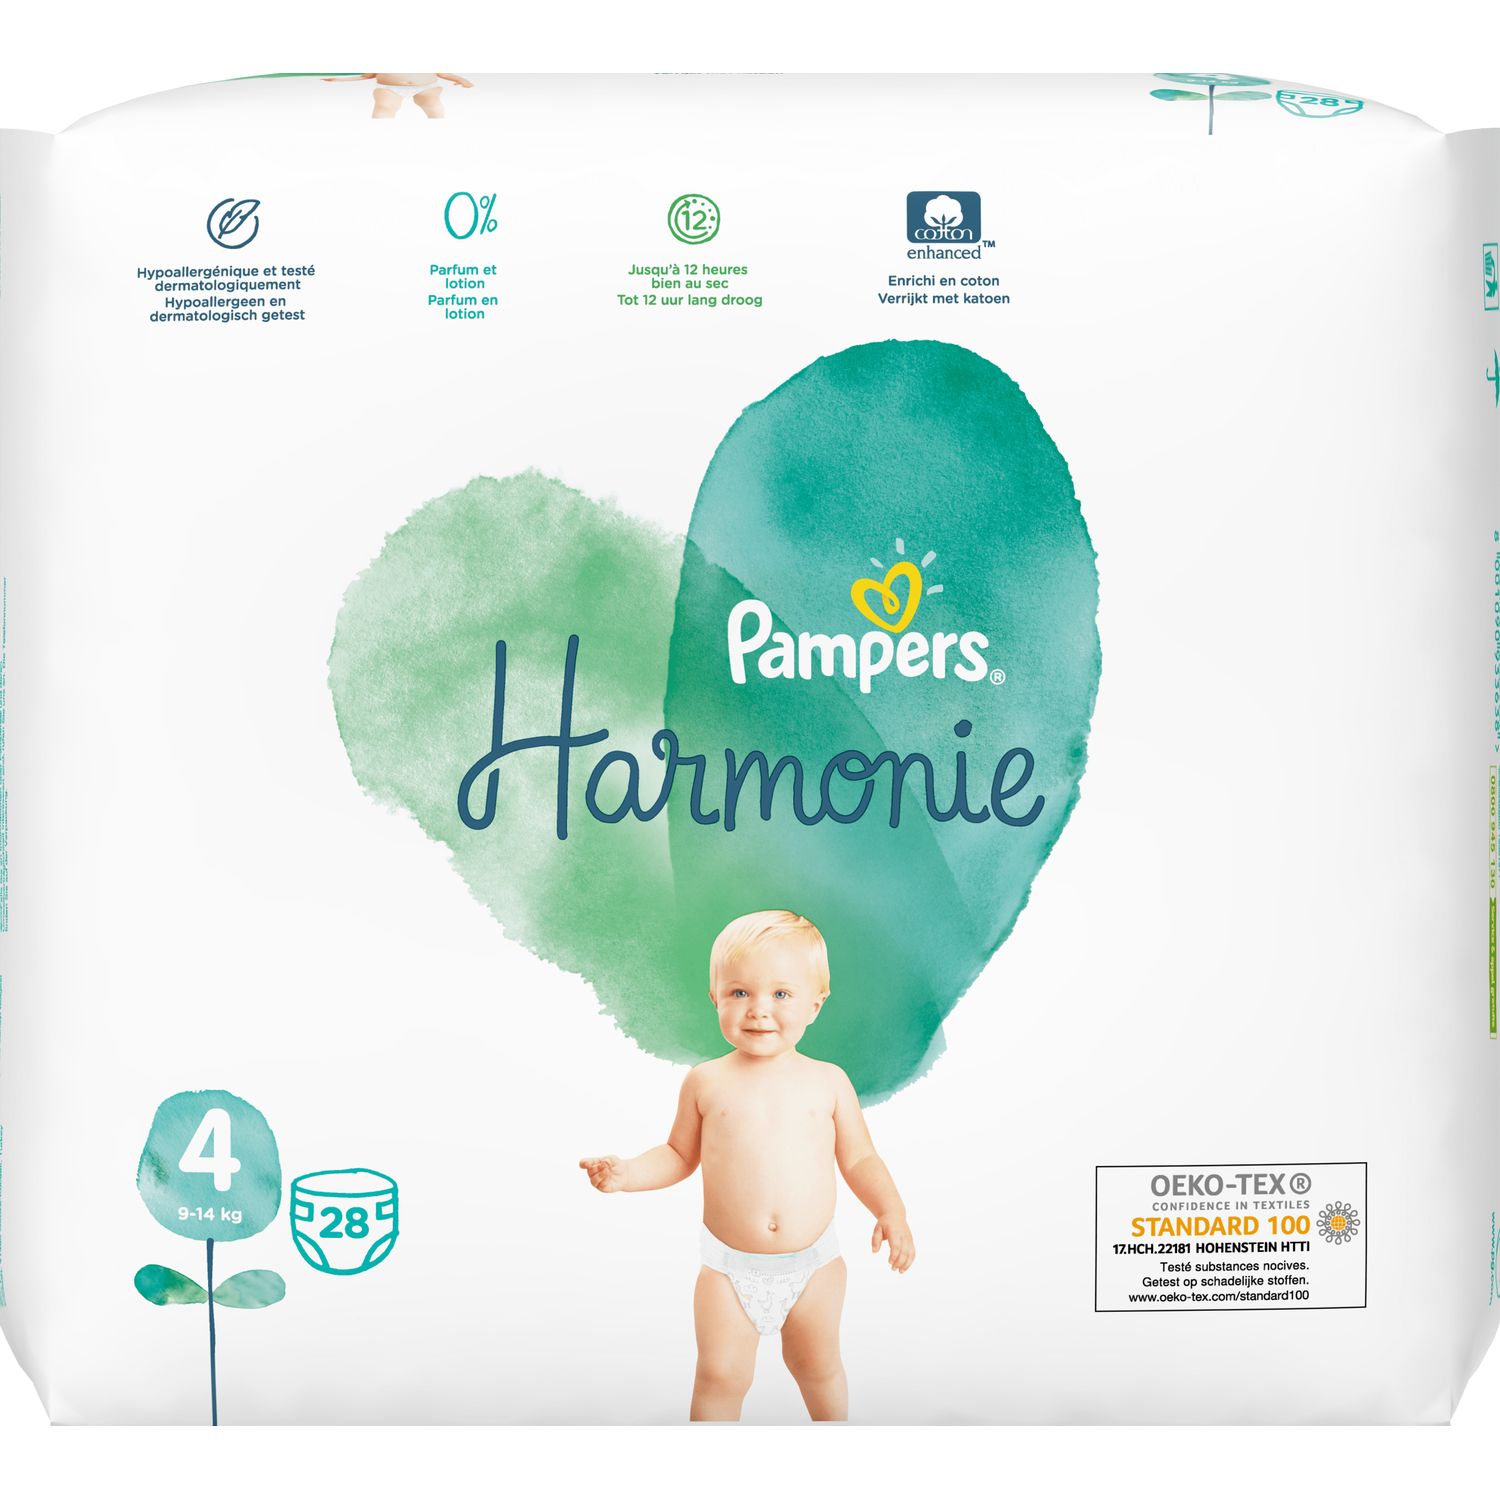 PAMPERS Harmonie couches taille 4 (9-14kg) 28 couches pas cher 